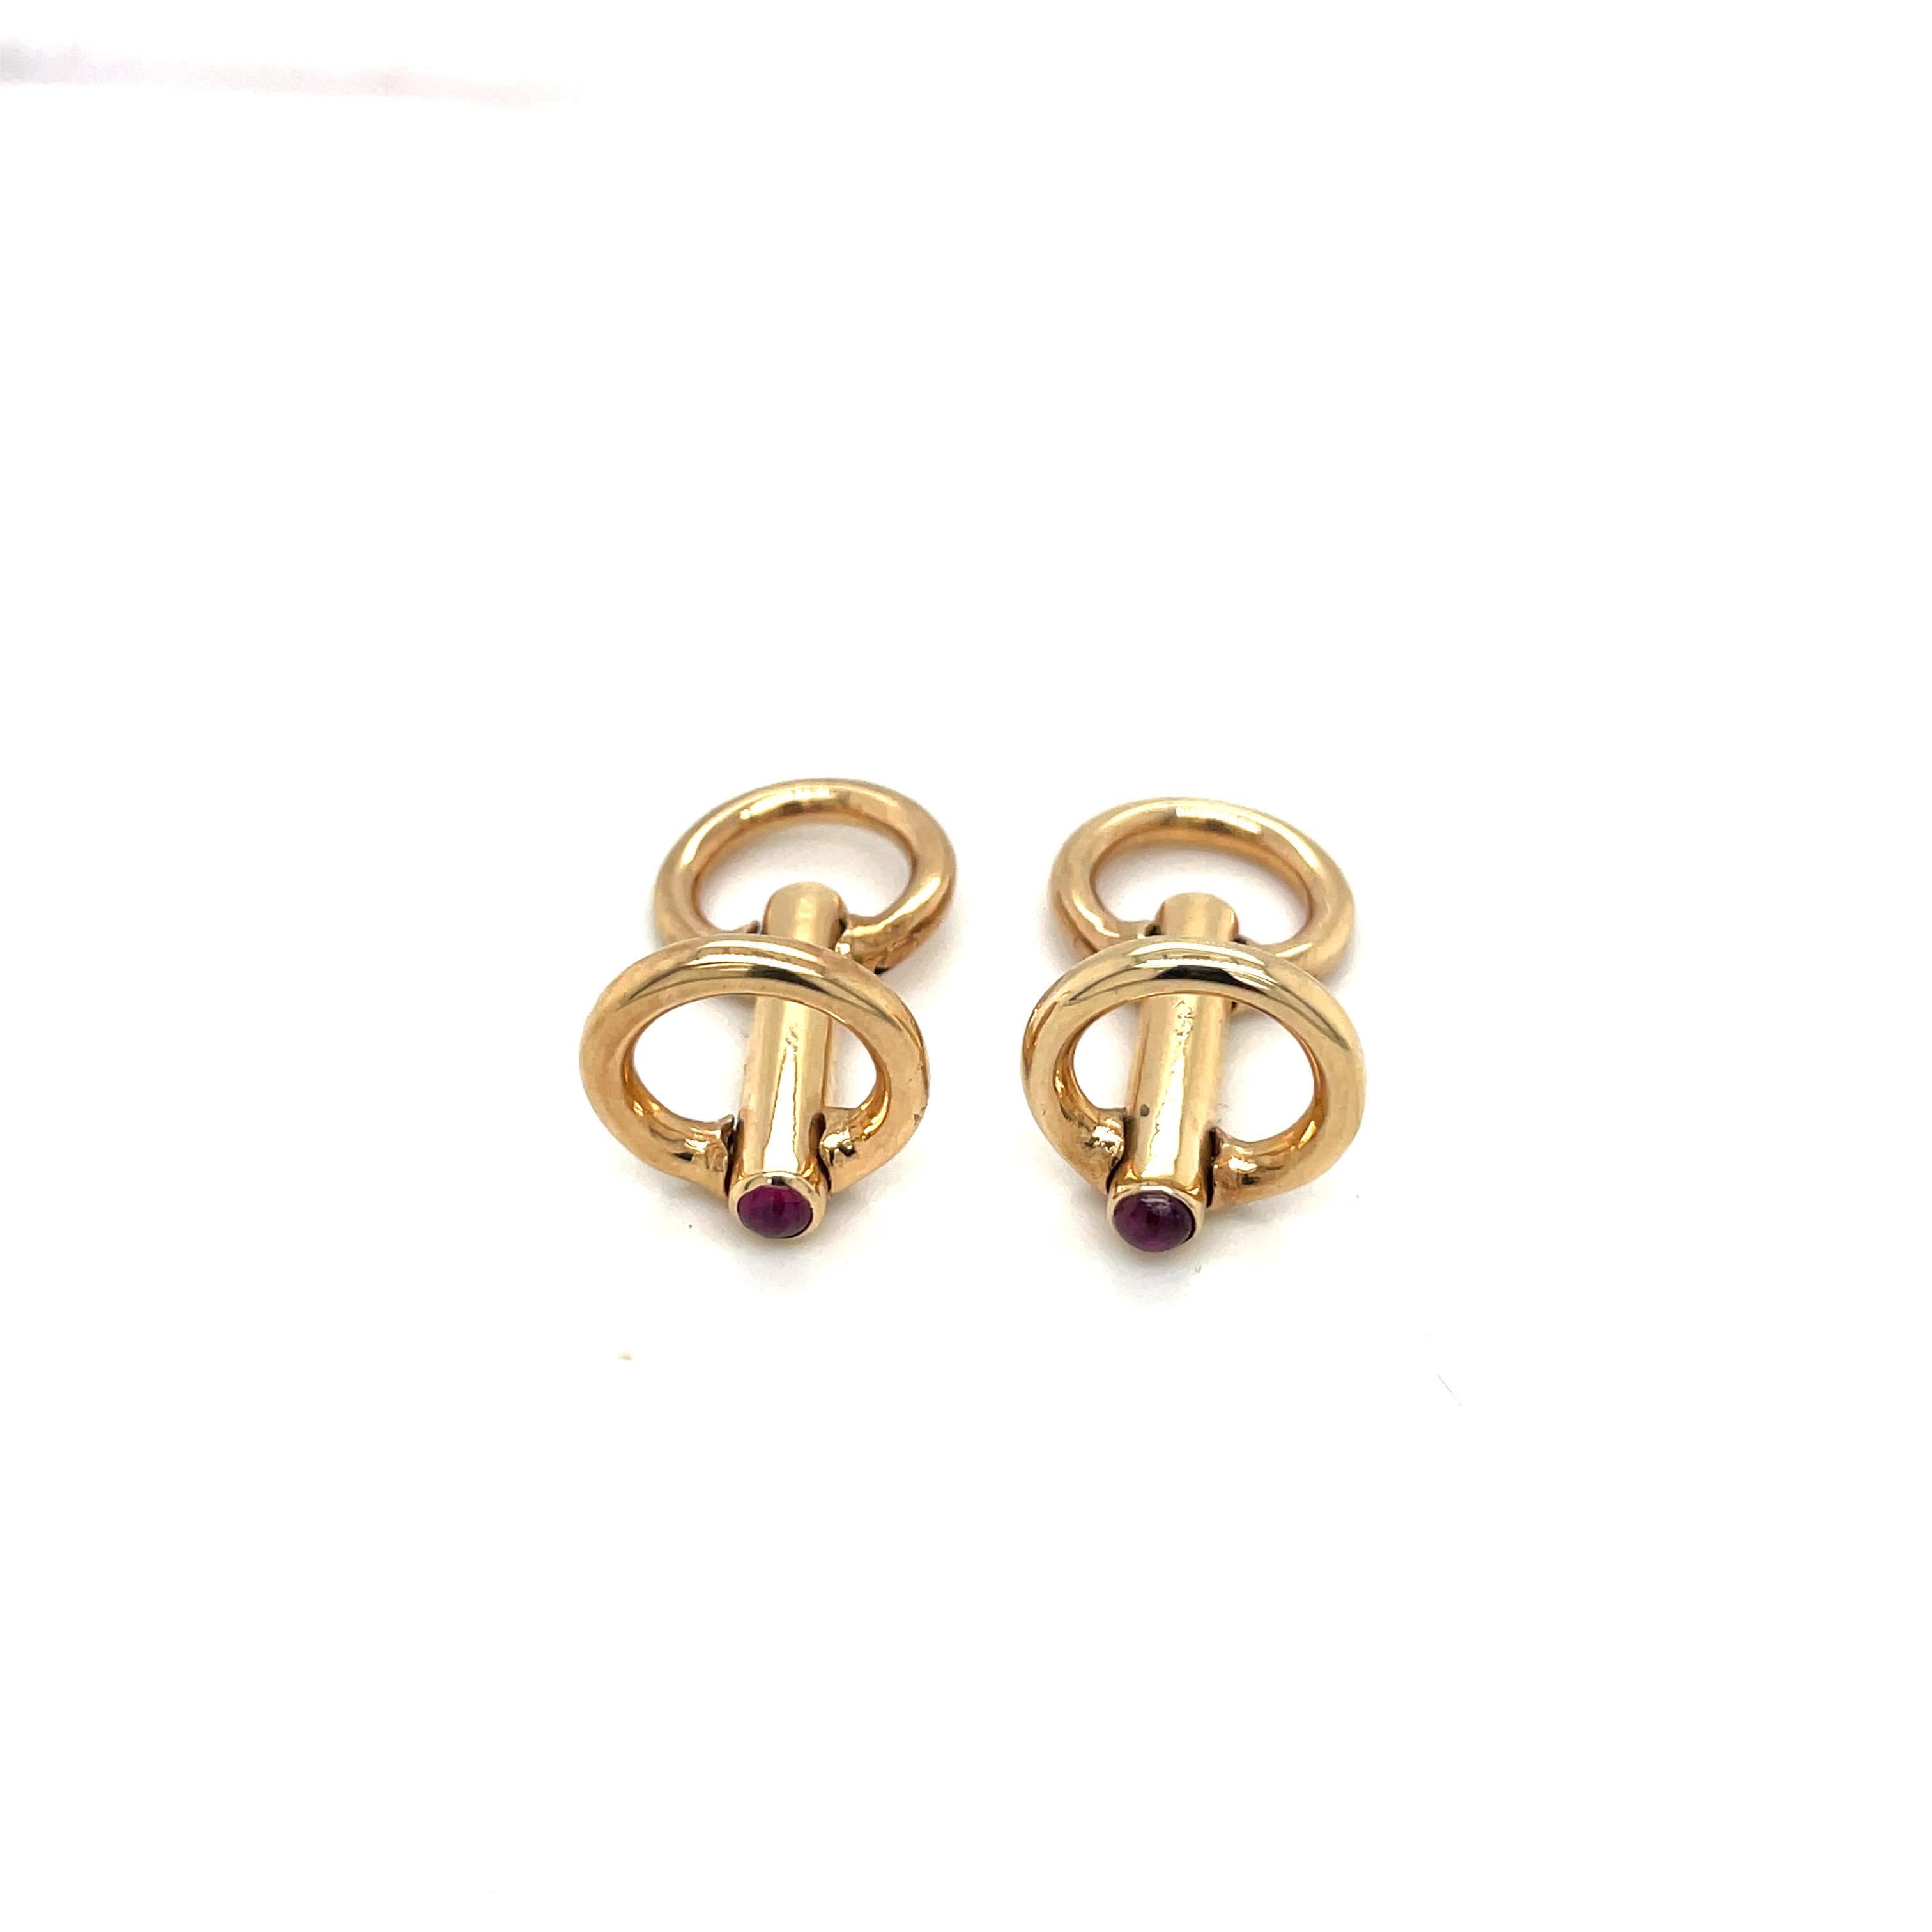 Contemporary 14KT Yellow Gold Cuff Links with 4 Ruby Cabochon